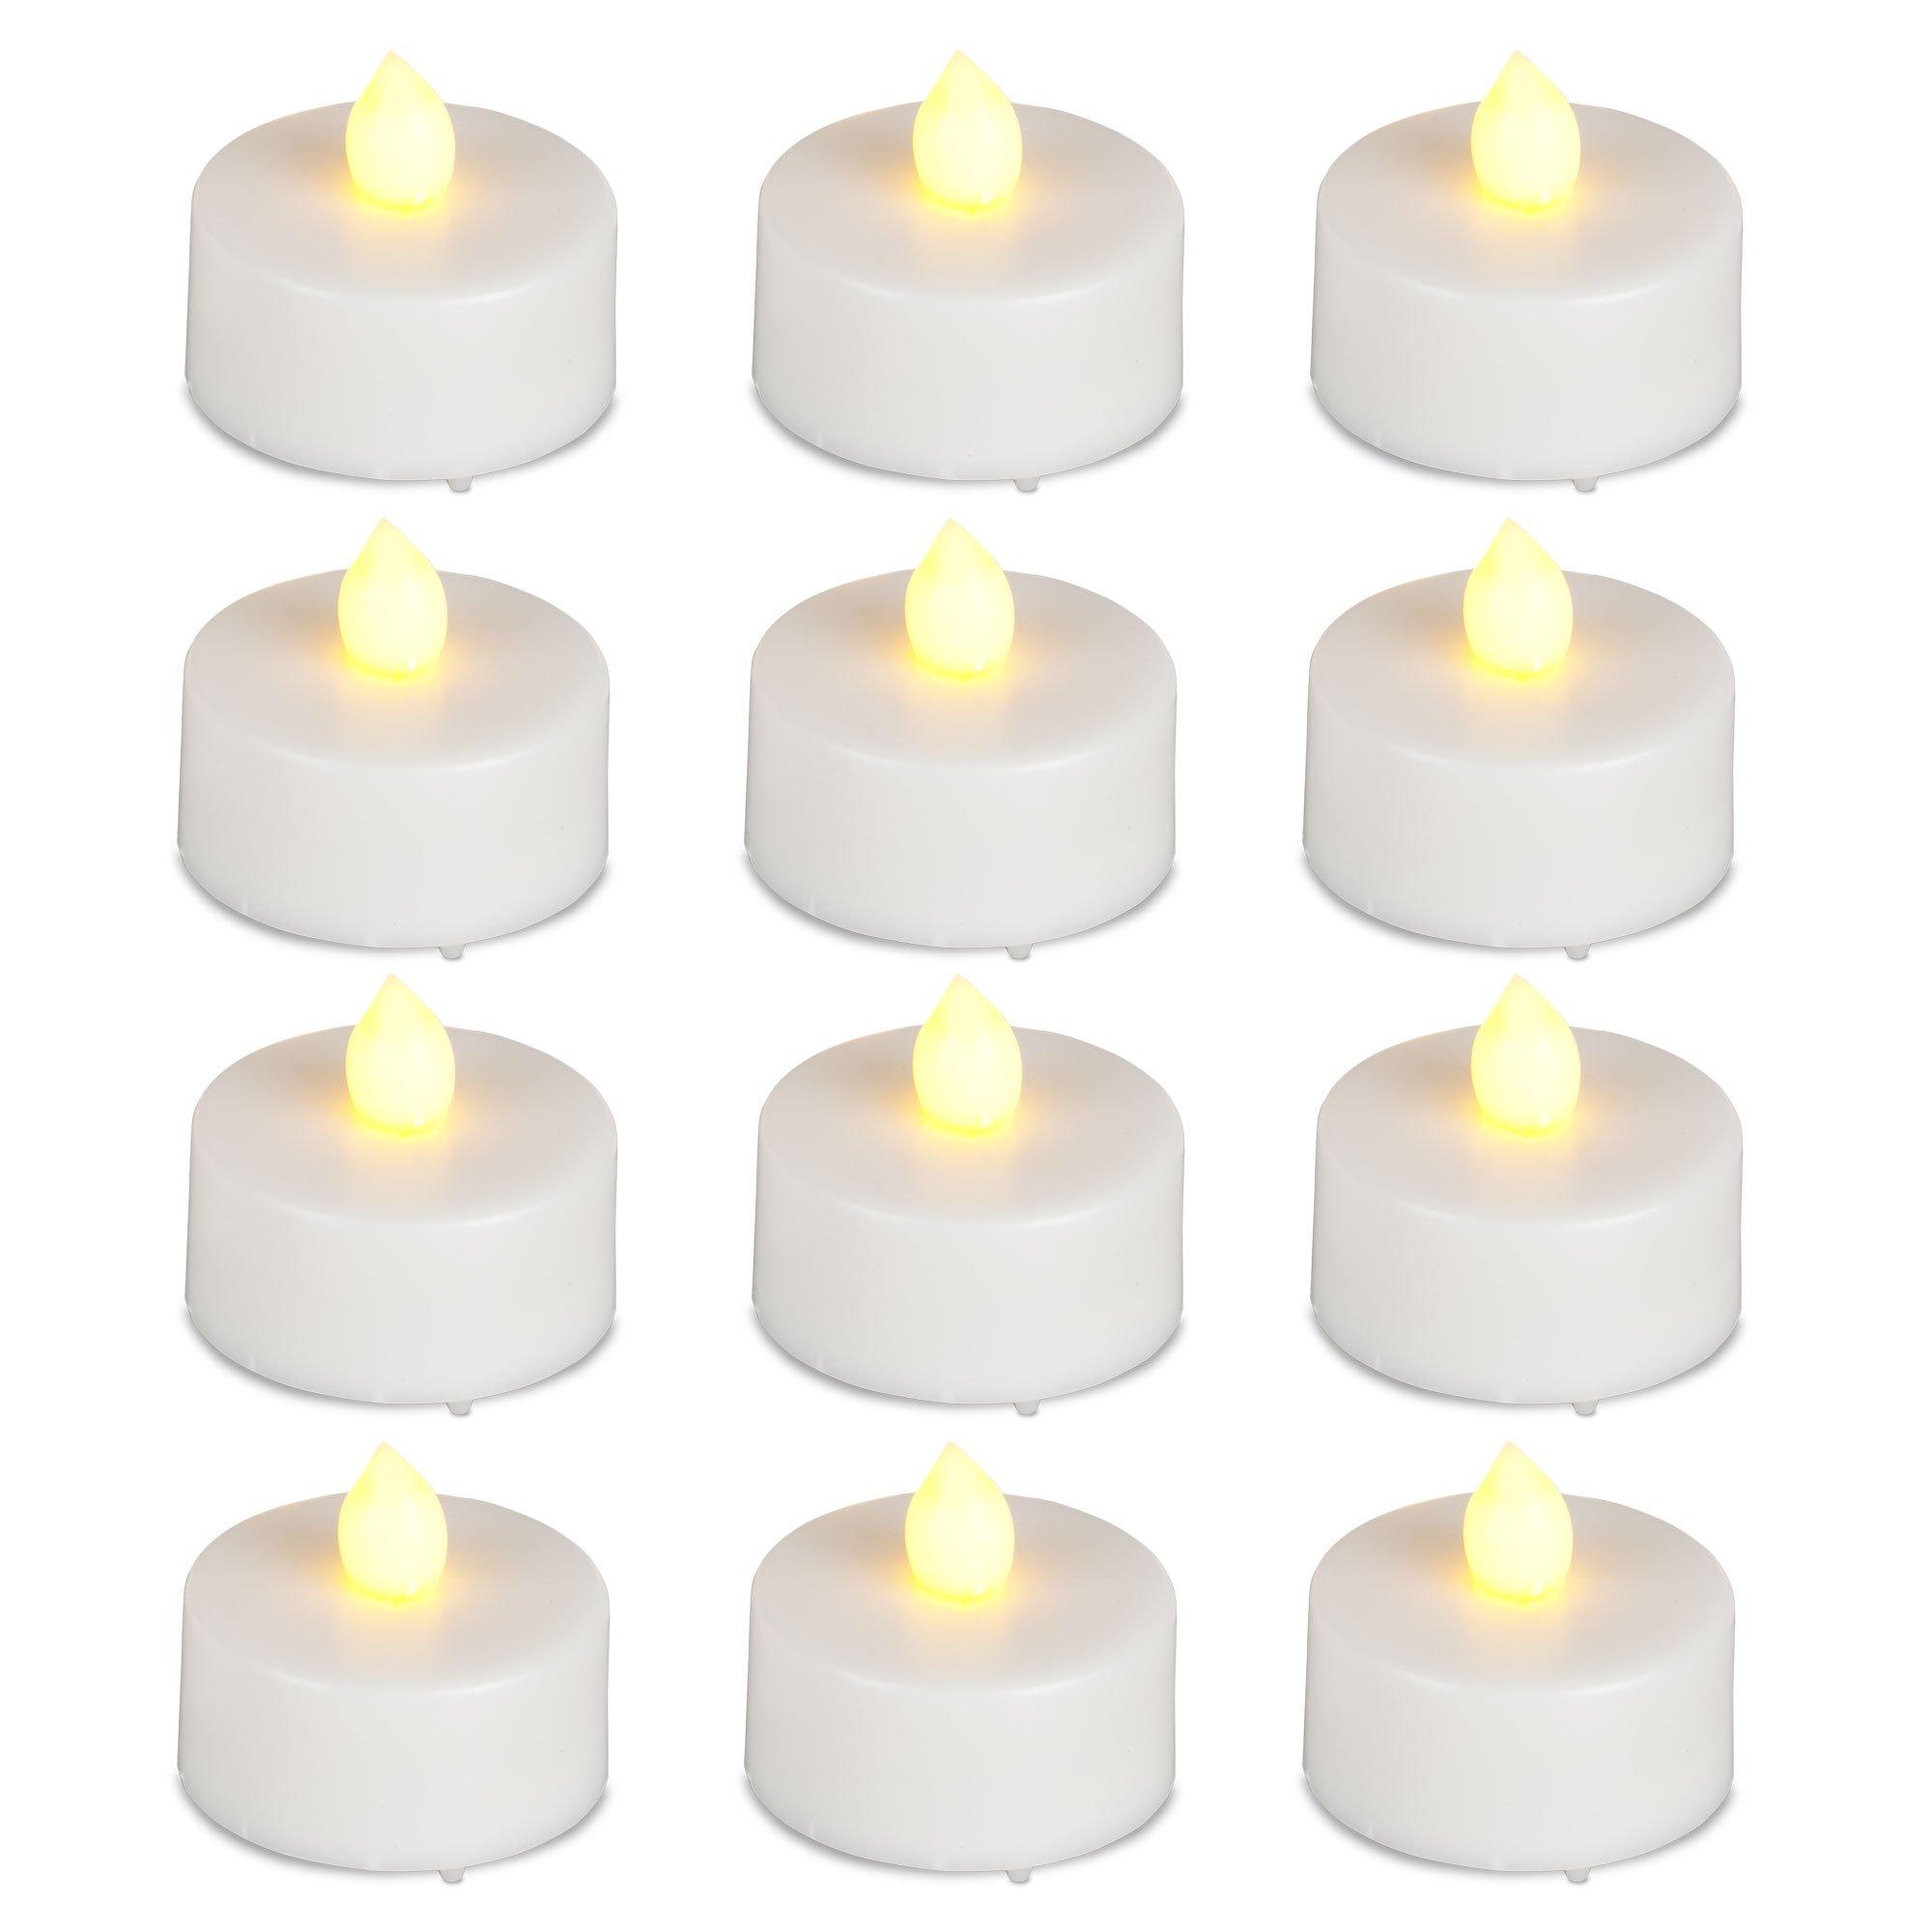 Flameless White LED Tealight Candles - USA's #1 Wholesale Supplier